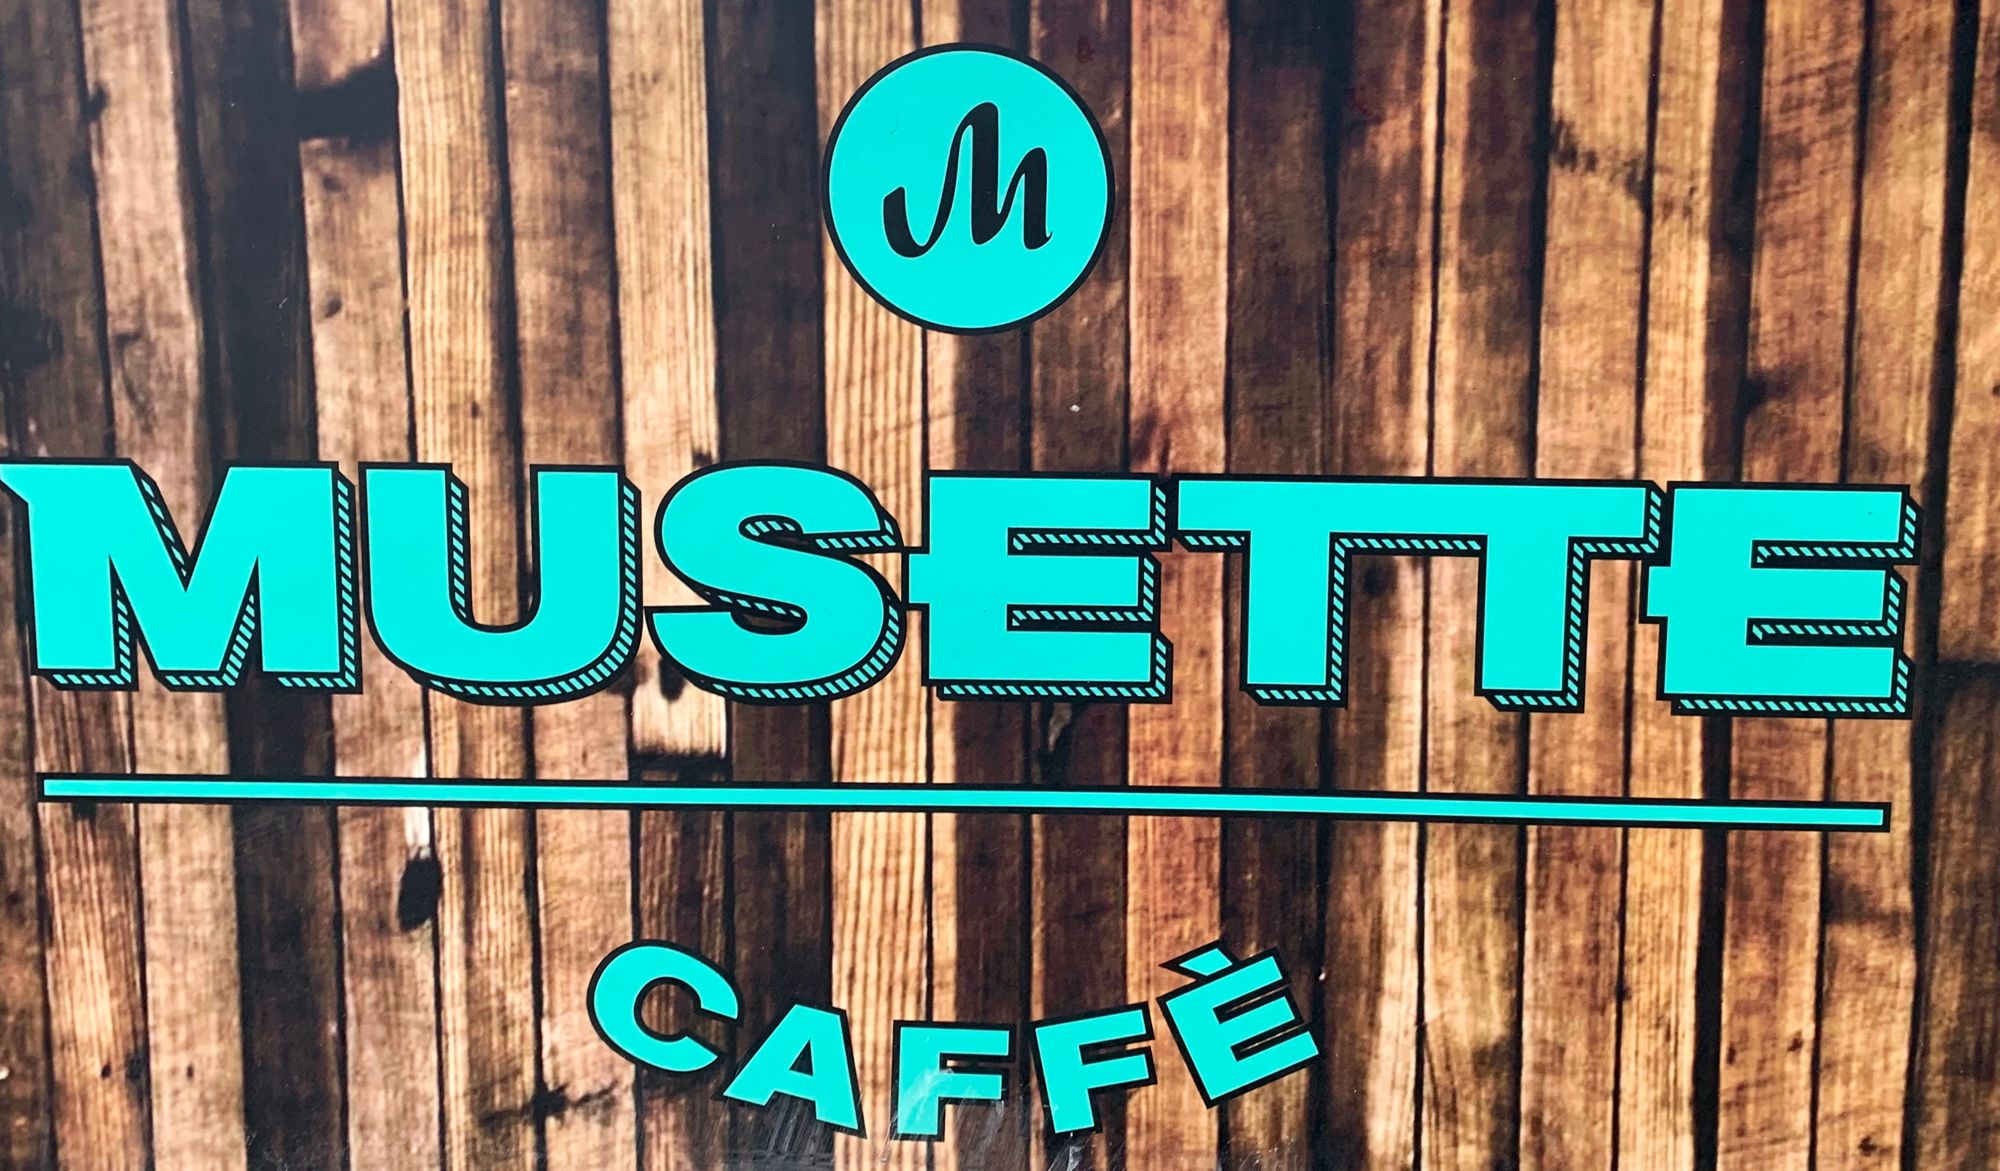 Goodbye Musette Café (for now?)